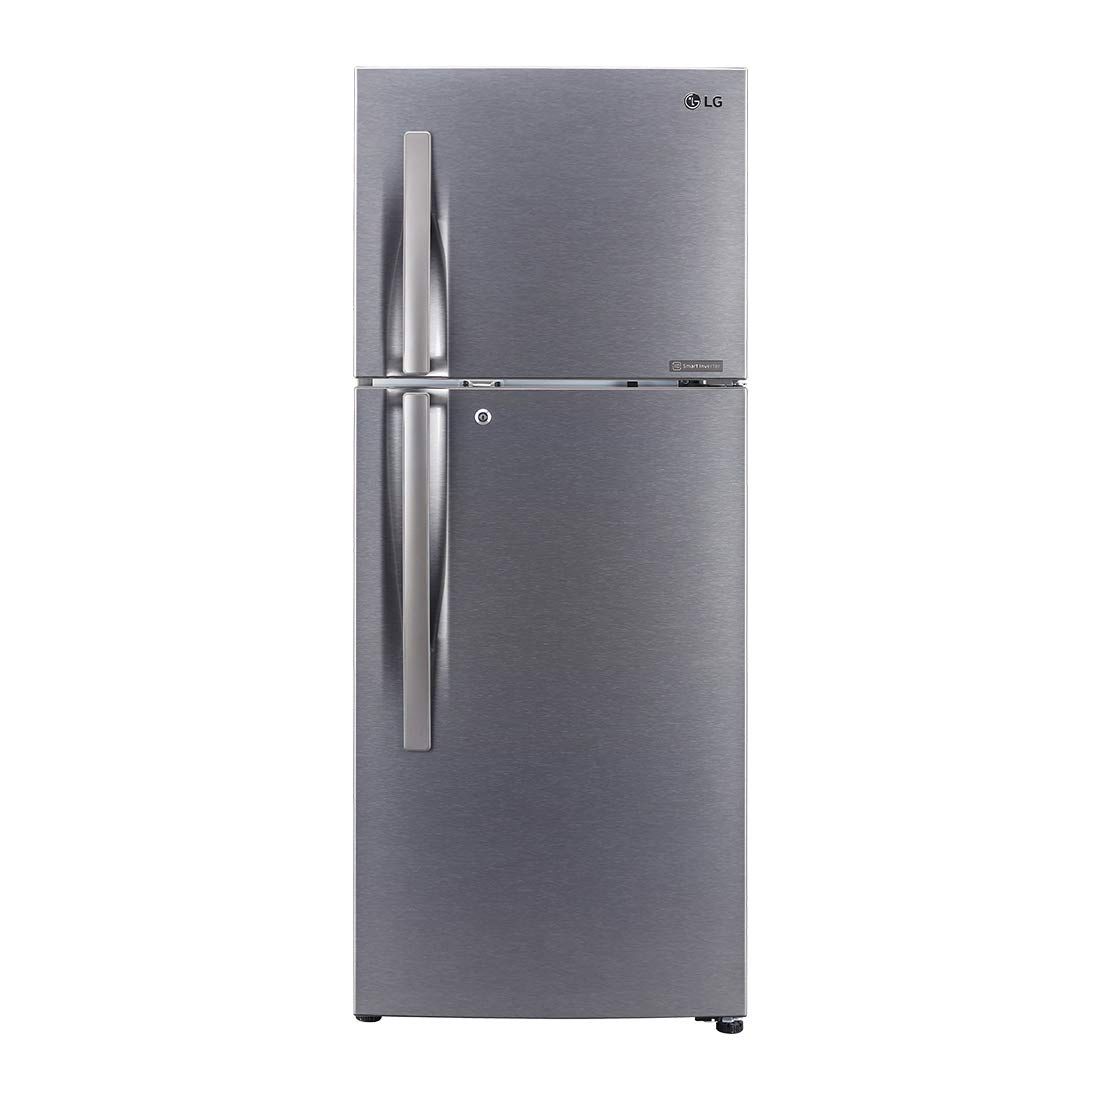 LG GLN292RDSY 260 L 2 Star Double Door Refrigerator Price in India